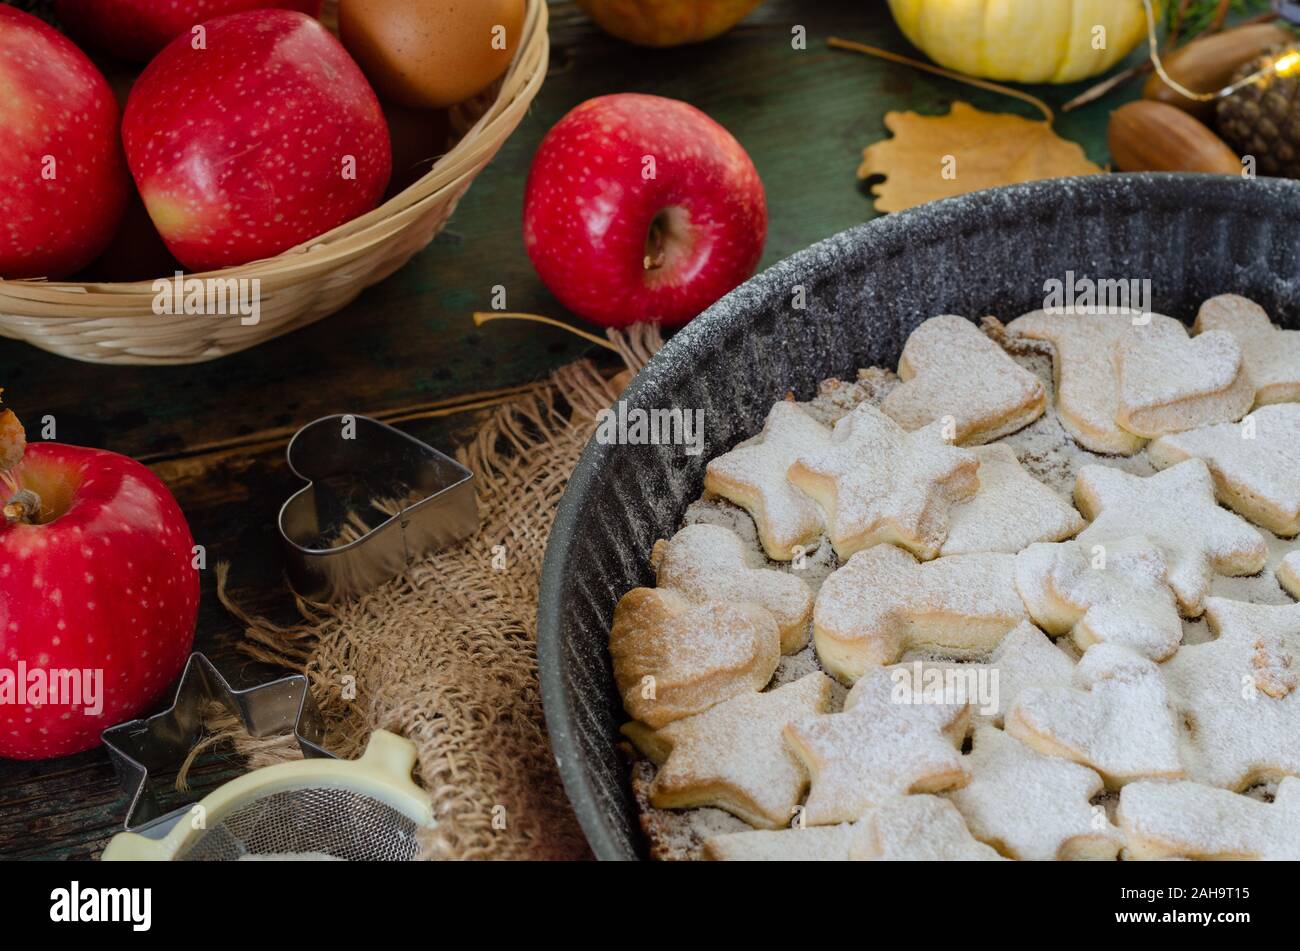 Fresh baked homemade apple pie on a wood table with cutter and apples. Stock Photo